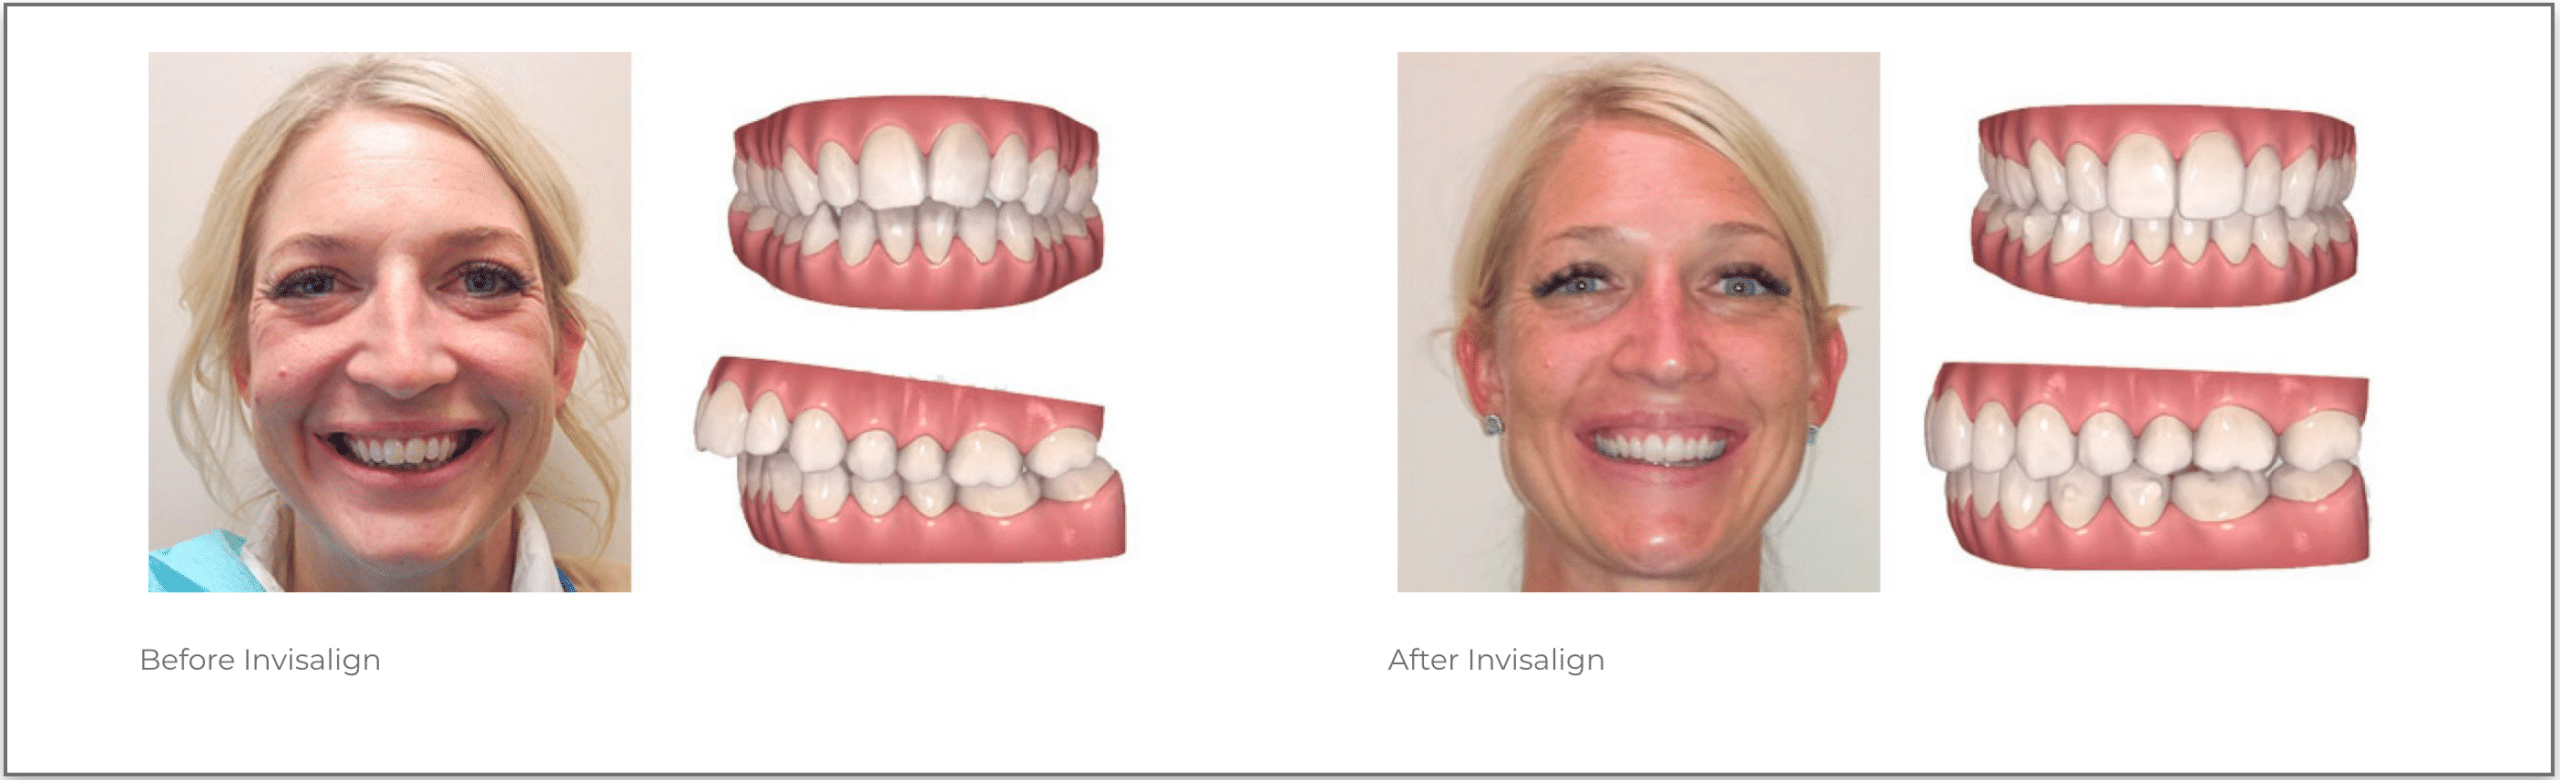 Invisalign Treatment: the Best Way to Get a Smile You Love